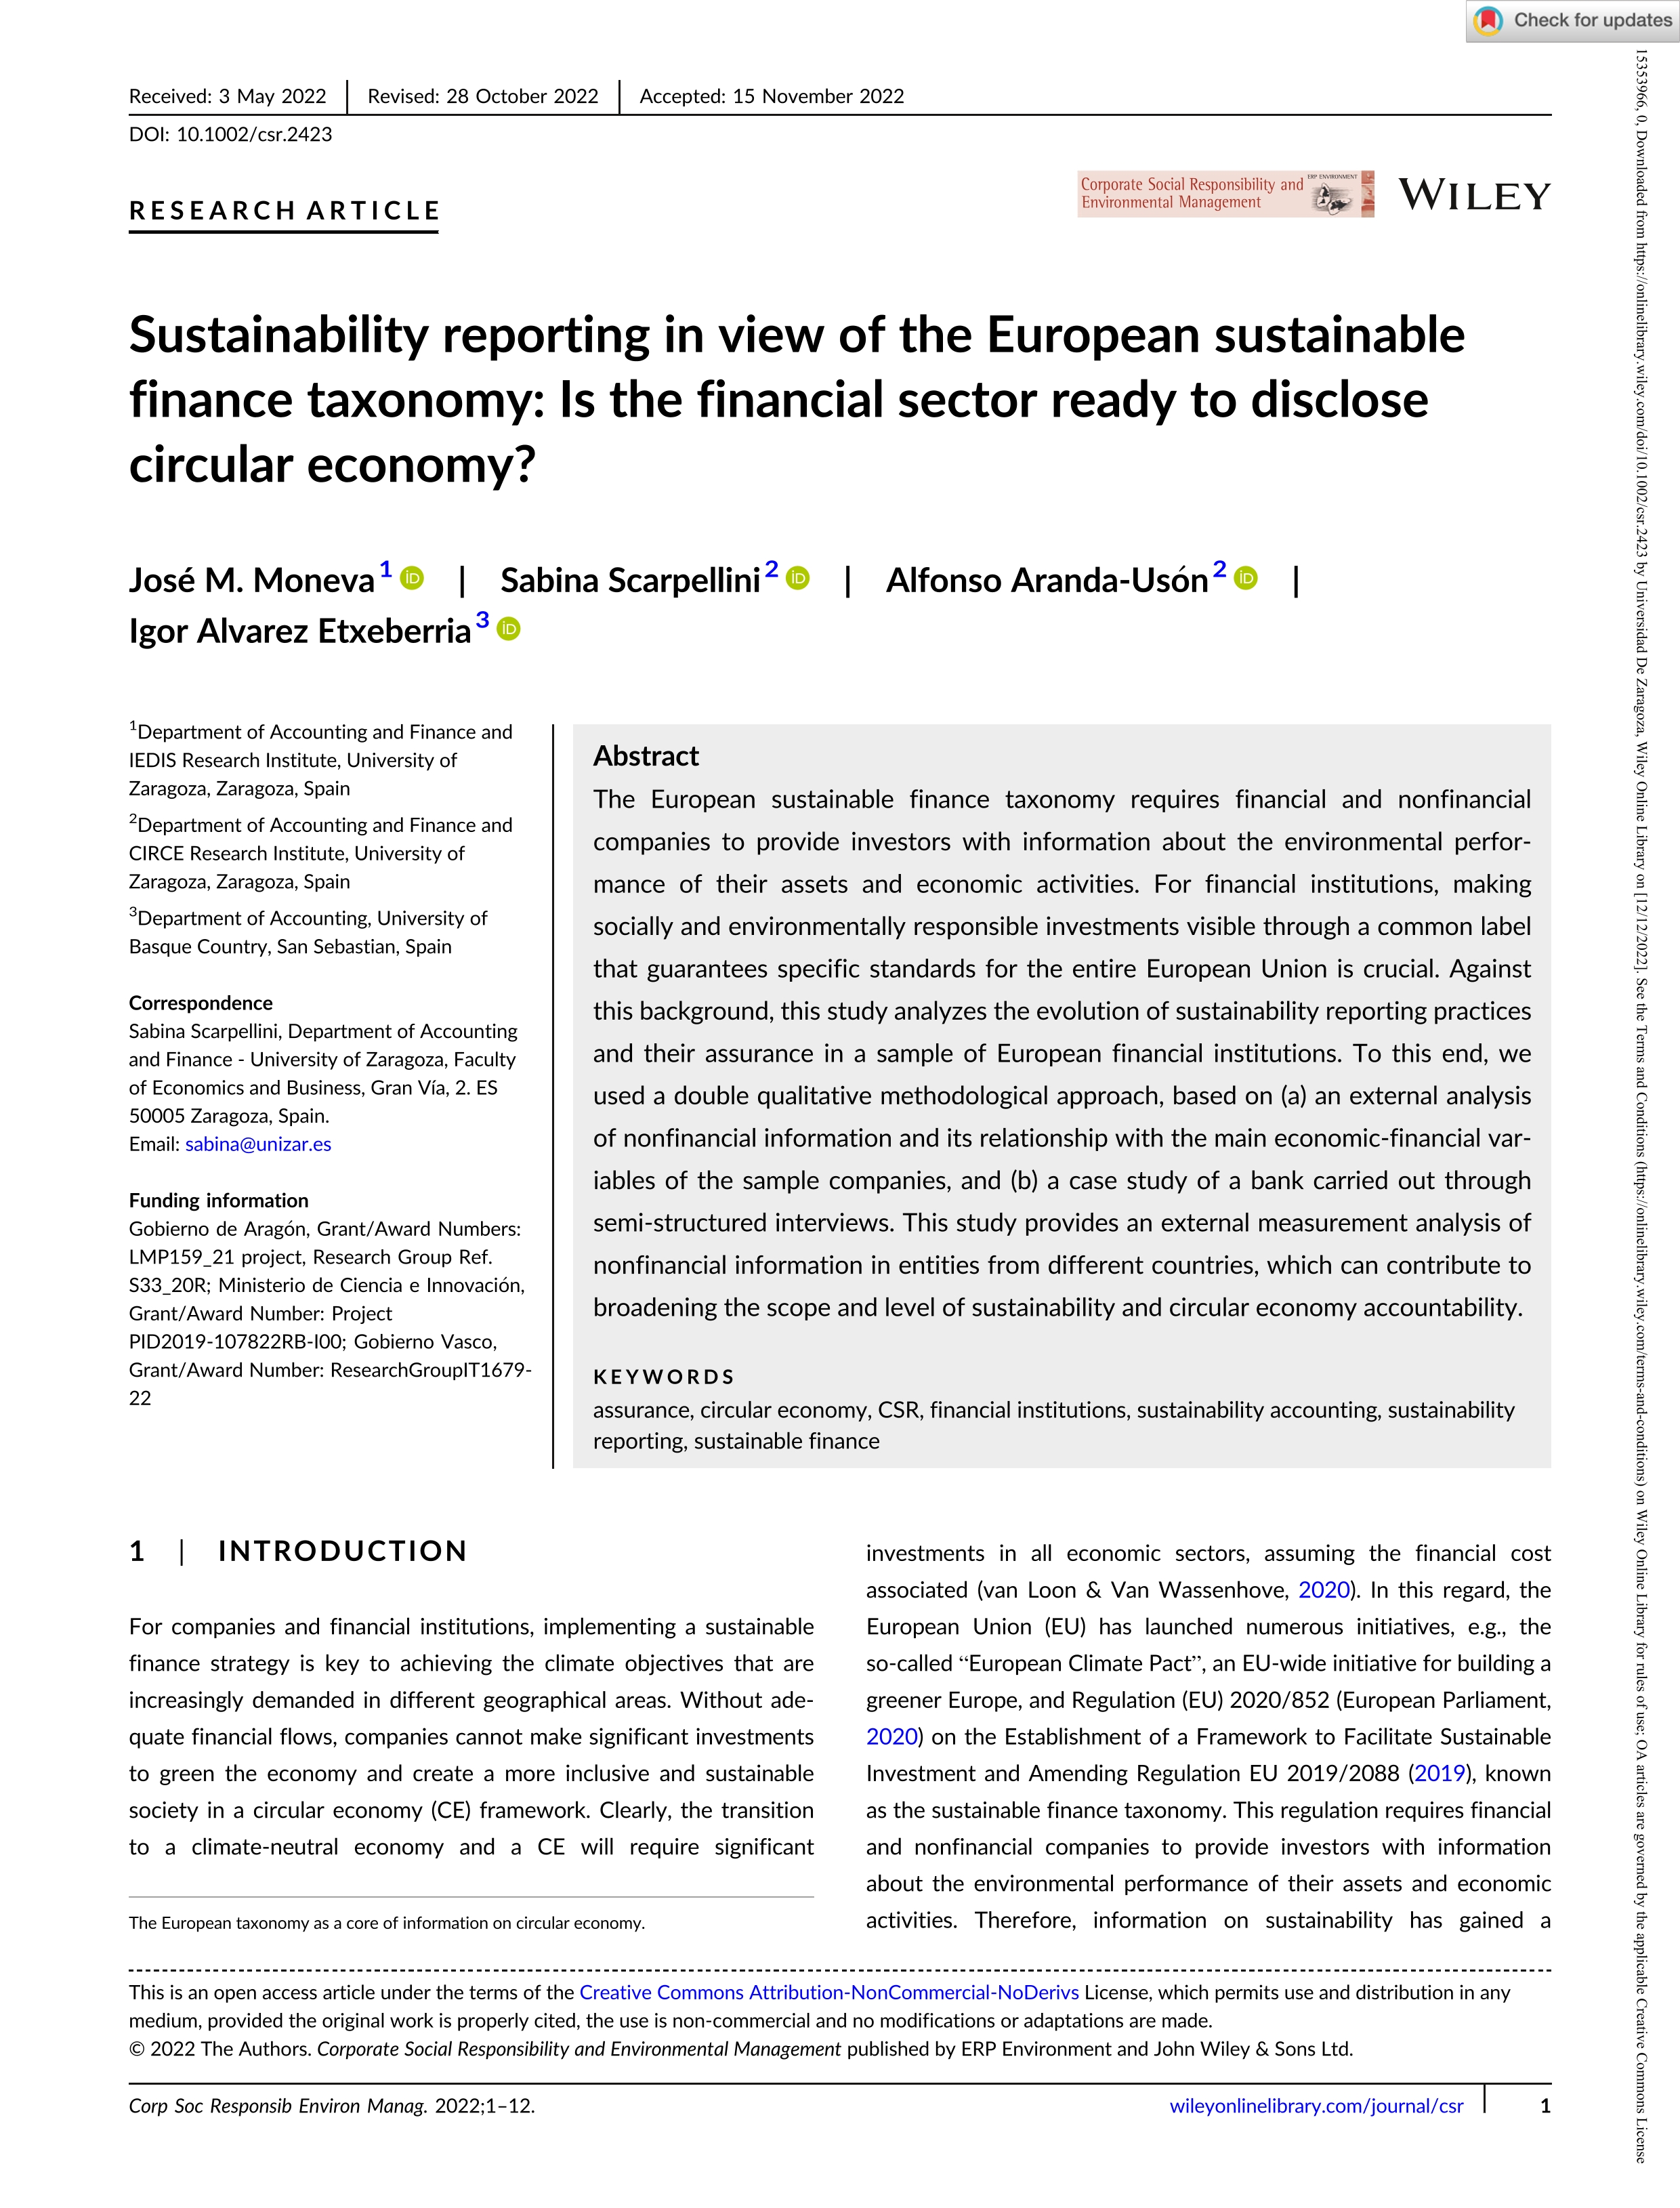 Sustainability reporting in view of the European sustainable finance taxonomy: Is the financial sector ready to disclose circular economy?